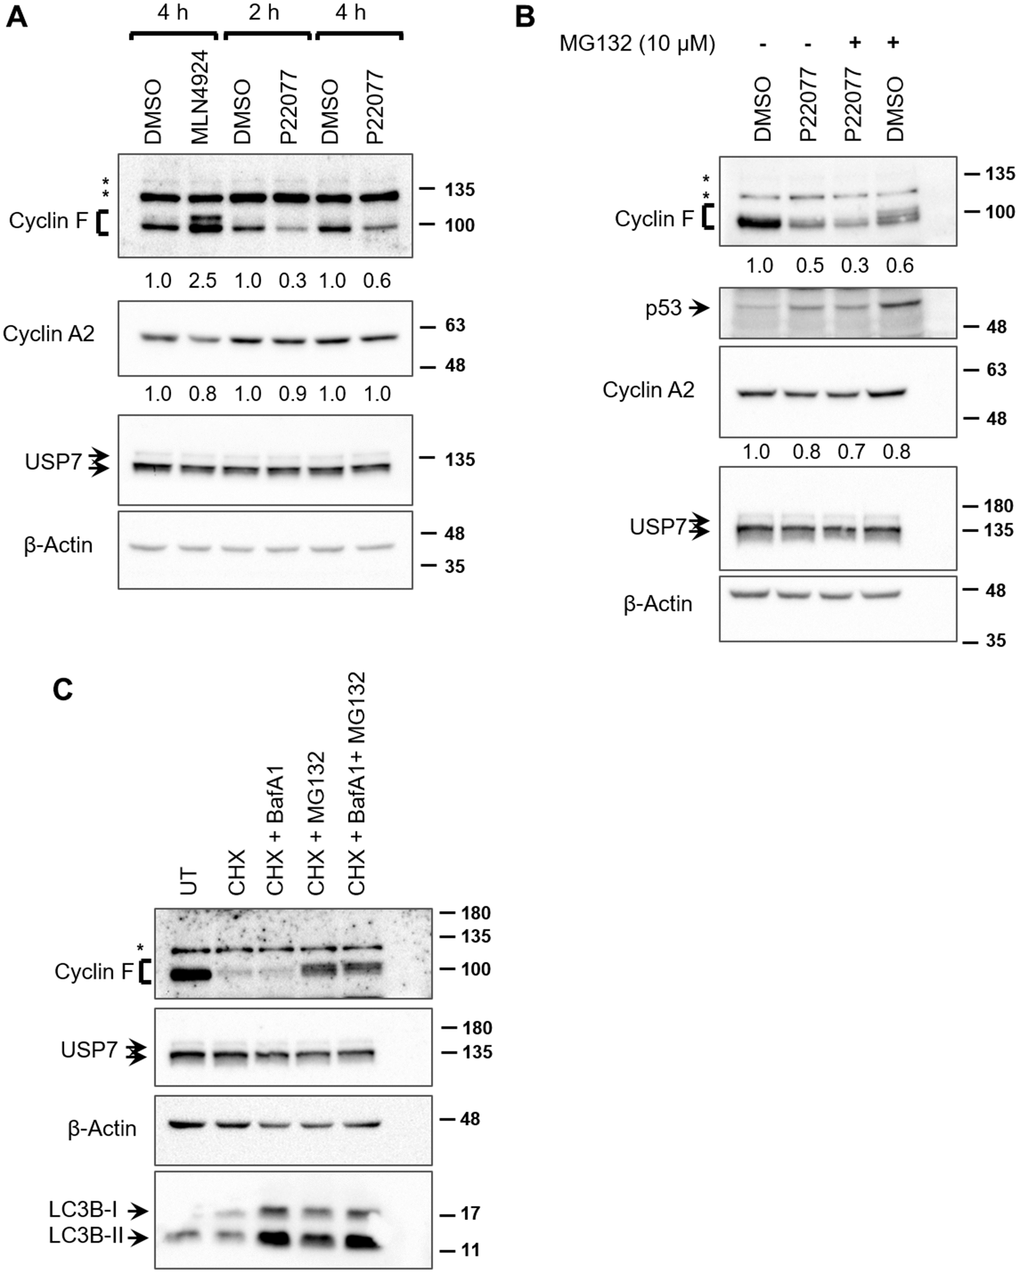 USP7 regulates cyclin F protein levels. (A) HeLa cells treated with DMSO, MLN4924 (10 μM), or P22077 (25 μM) for the indicated hours were lysed, and immunoblotted as indicated. β-Actin was the loading control. Asterisks denote non-specific bands. Fold changes were calculated with densitometric values for cyclin F and cyclin A2 blots using β-Actin as loading control. (B) HCT116 cells were treated with DMSO or P22077 (25 μM) for 5 h. Where indicated, cells were treated with MG132 (10 μM) for 4 h prior to harvest. Cells were then lysed and immunoblotted as indicated. Asterisks denote non-specific bands. Fold changes were calculated with densitometric values for cyclin F and cyclin A2 blots using β-Actin as loading control. (C) HCT116 cells were treated with DMSO or cycloheximide (CHX; 50 μg/mL) for 75 min. Where indicated, bafilomycin A1 (BafA1; 100 nM) and/or MG132 (12.5 μM) were added along with CHX. Cells were lysed, and immunoblotted as indicated. Asterisks denote non-specific bands.